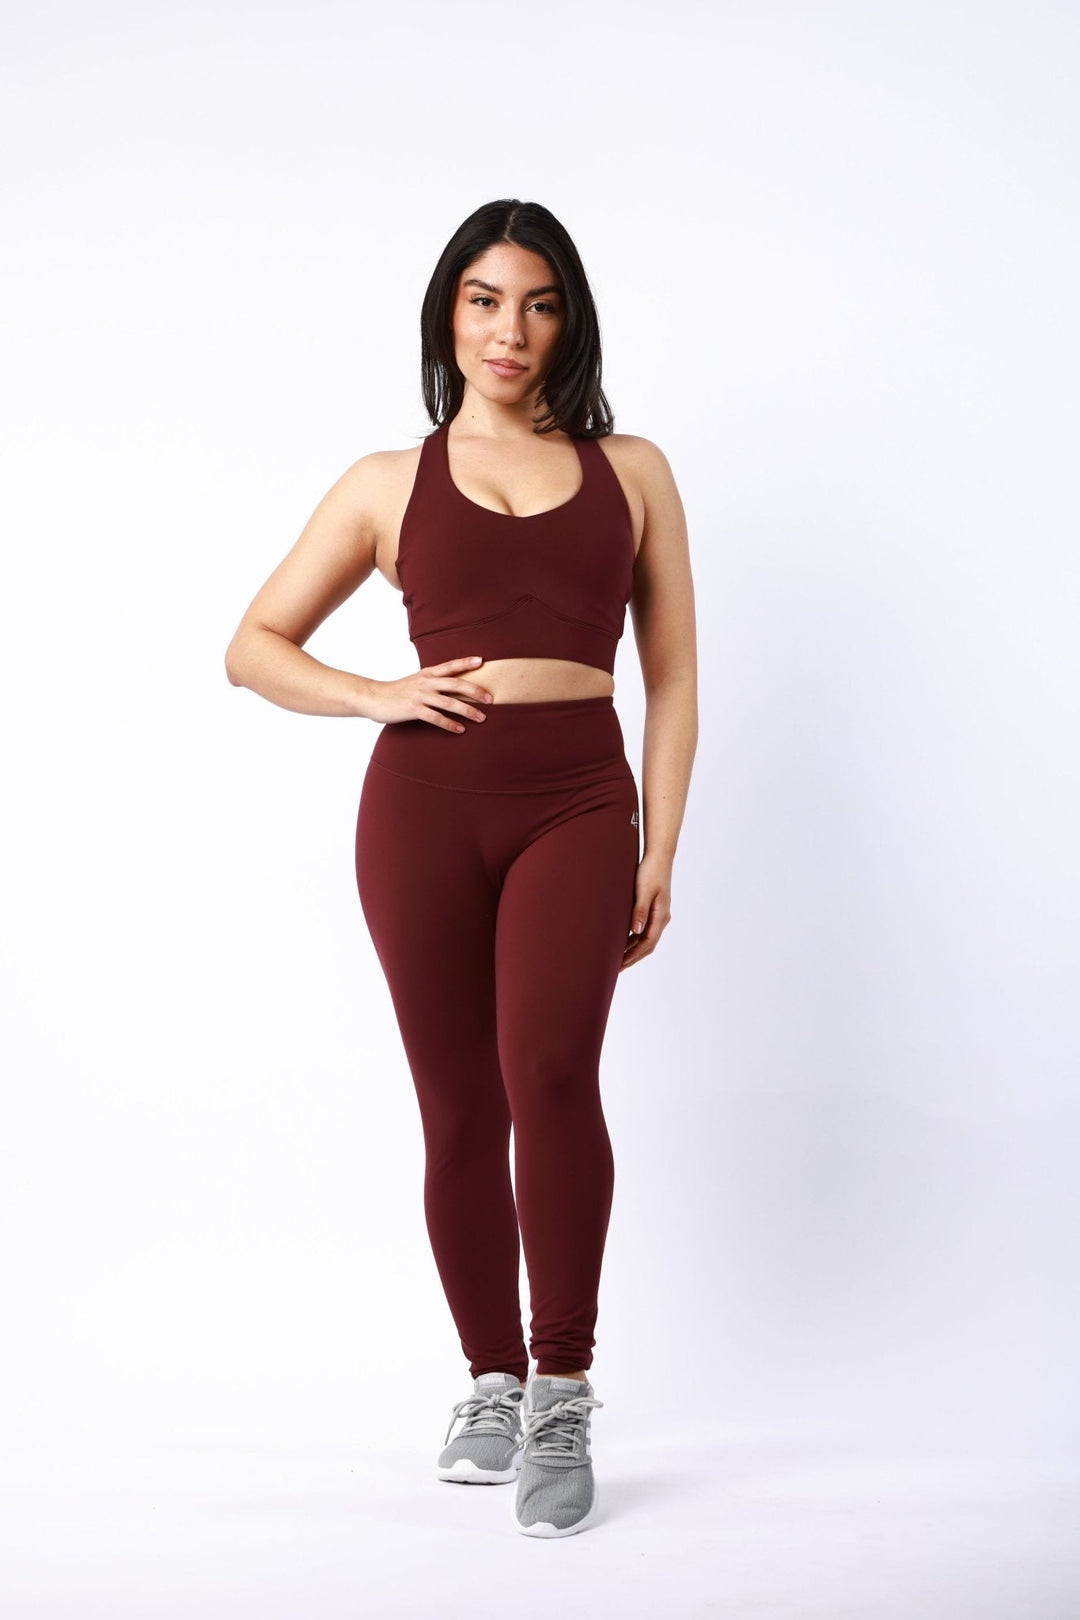 Athletic Women's Leggings No Pockets In Wine Tasting - attivousa Free Shipping over $75 Womens Activewear Attivo